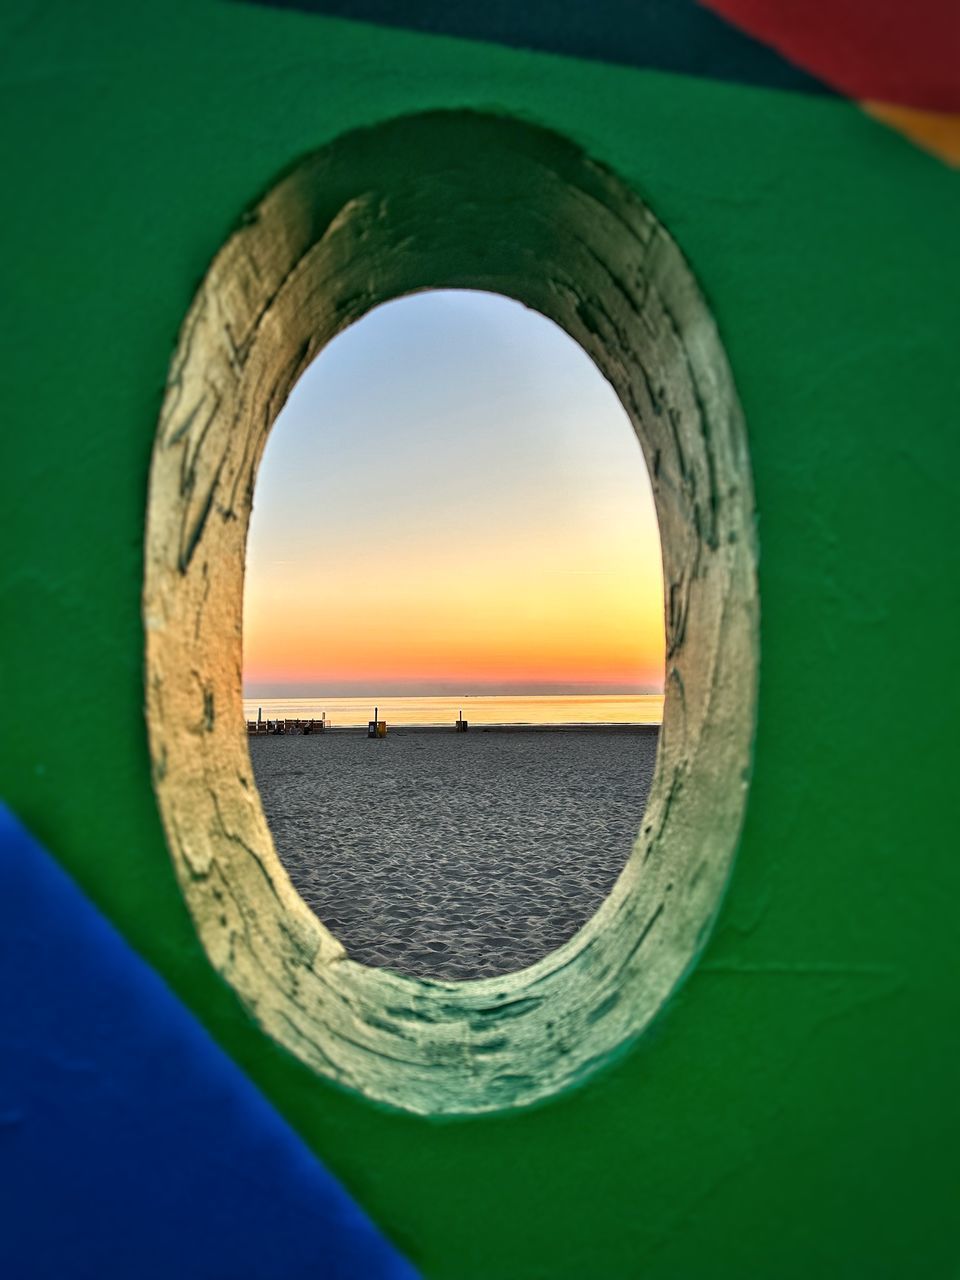 green, blue, water, sky, circle, sea, geometric shape, reflection, yellow, nature, shape, no people, architecture, light, outdoors, sunlight, hole, scenics - nature, porthole, day, tranquility, built structure, sunset, land, nautical vessel, arch, beauty in nature